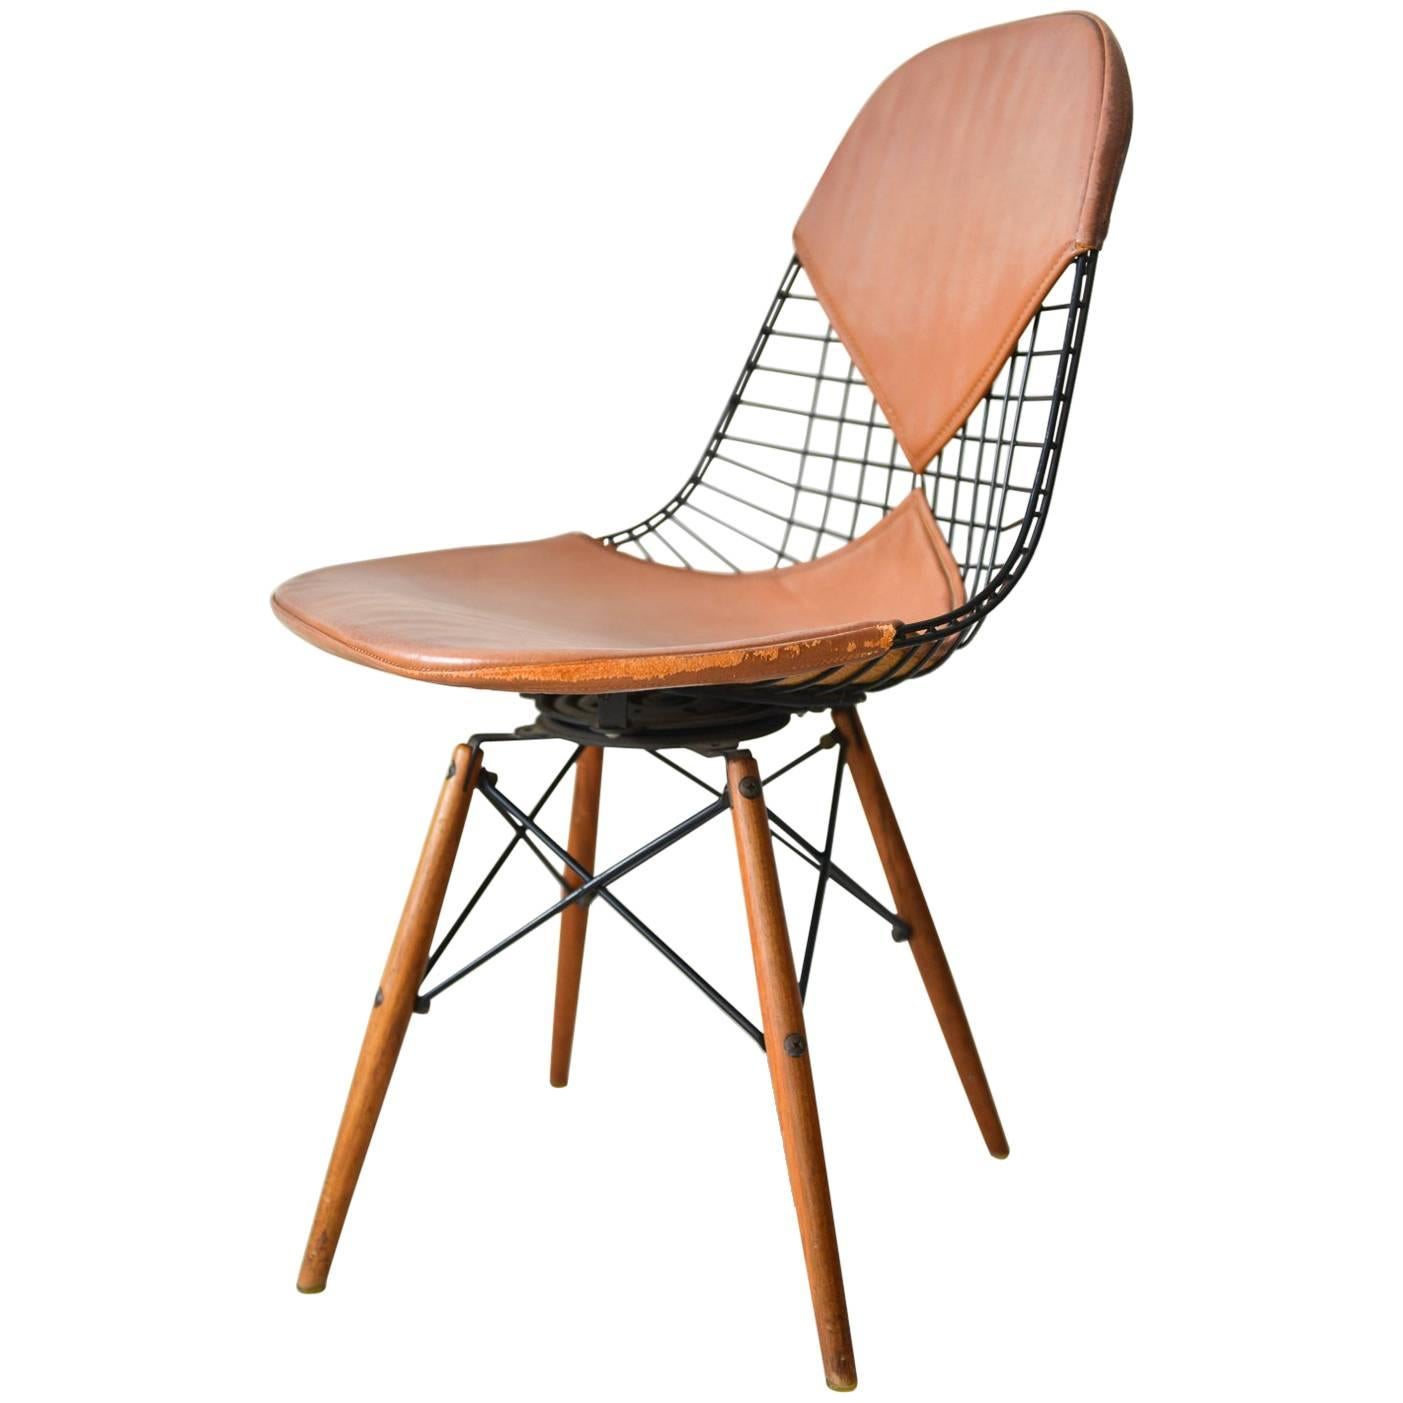 First Generation Eames PKW-2 Wire Chair with Walnut Dowel Legs, circa 1951